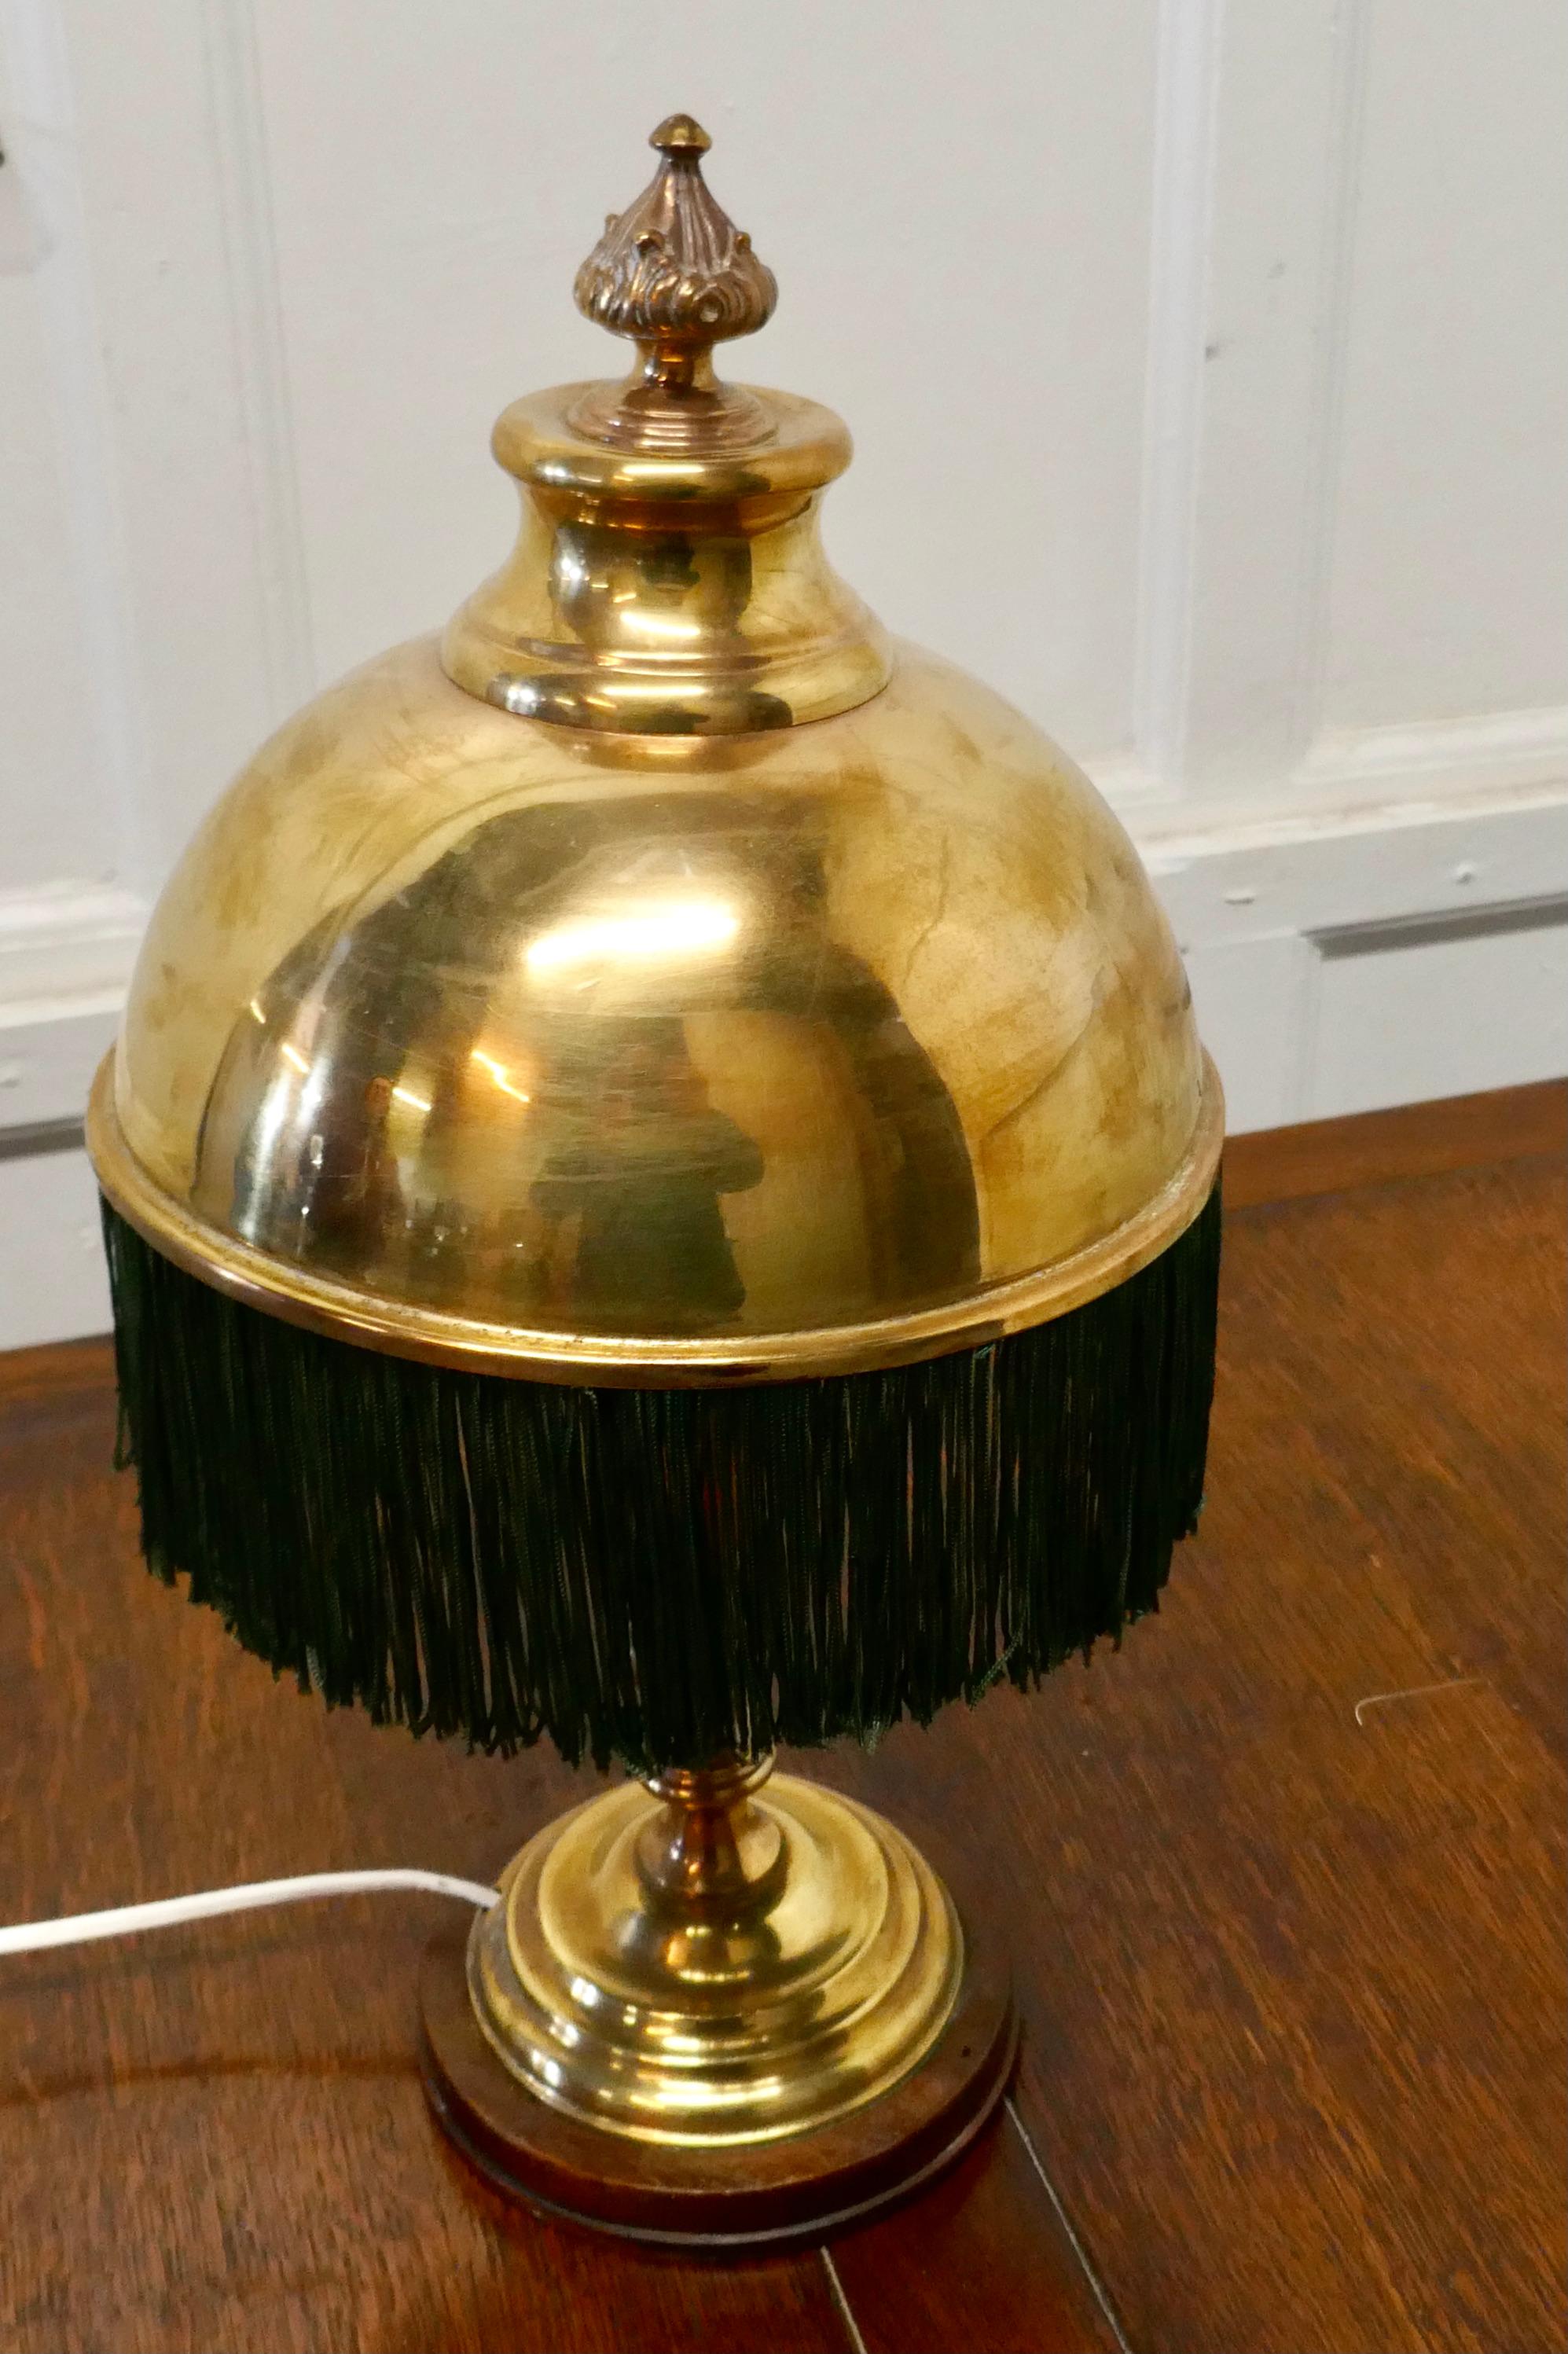 Edwardian reading lamp with fringed brass dome shade

A very unusual piece, the lamp is made in brass on a wooden base, it has a very unusual brass shade which throws the light downward for reading
The lamp is in good condition and working, it is